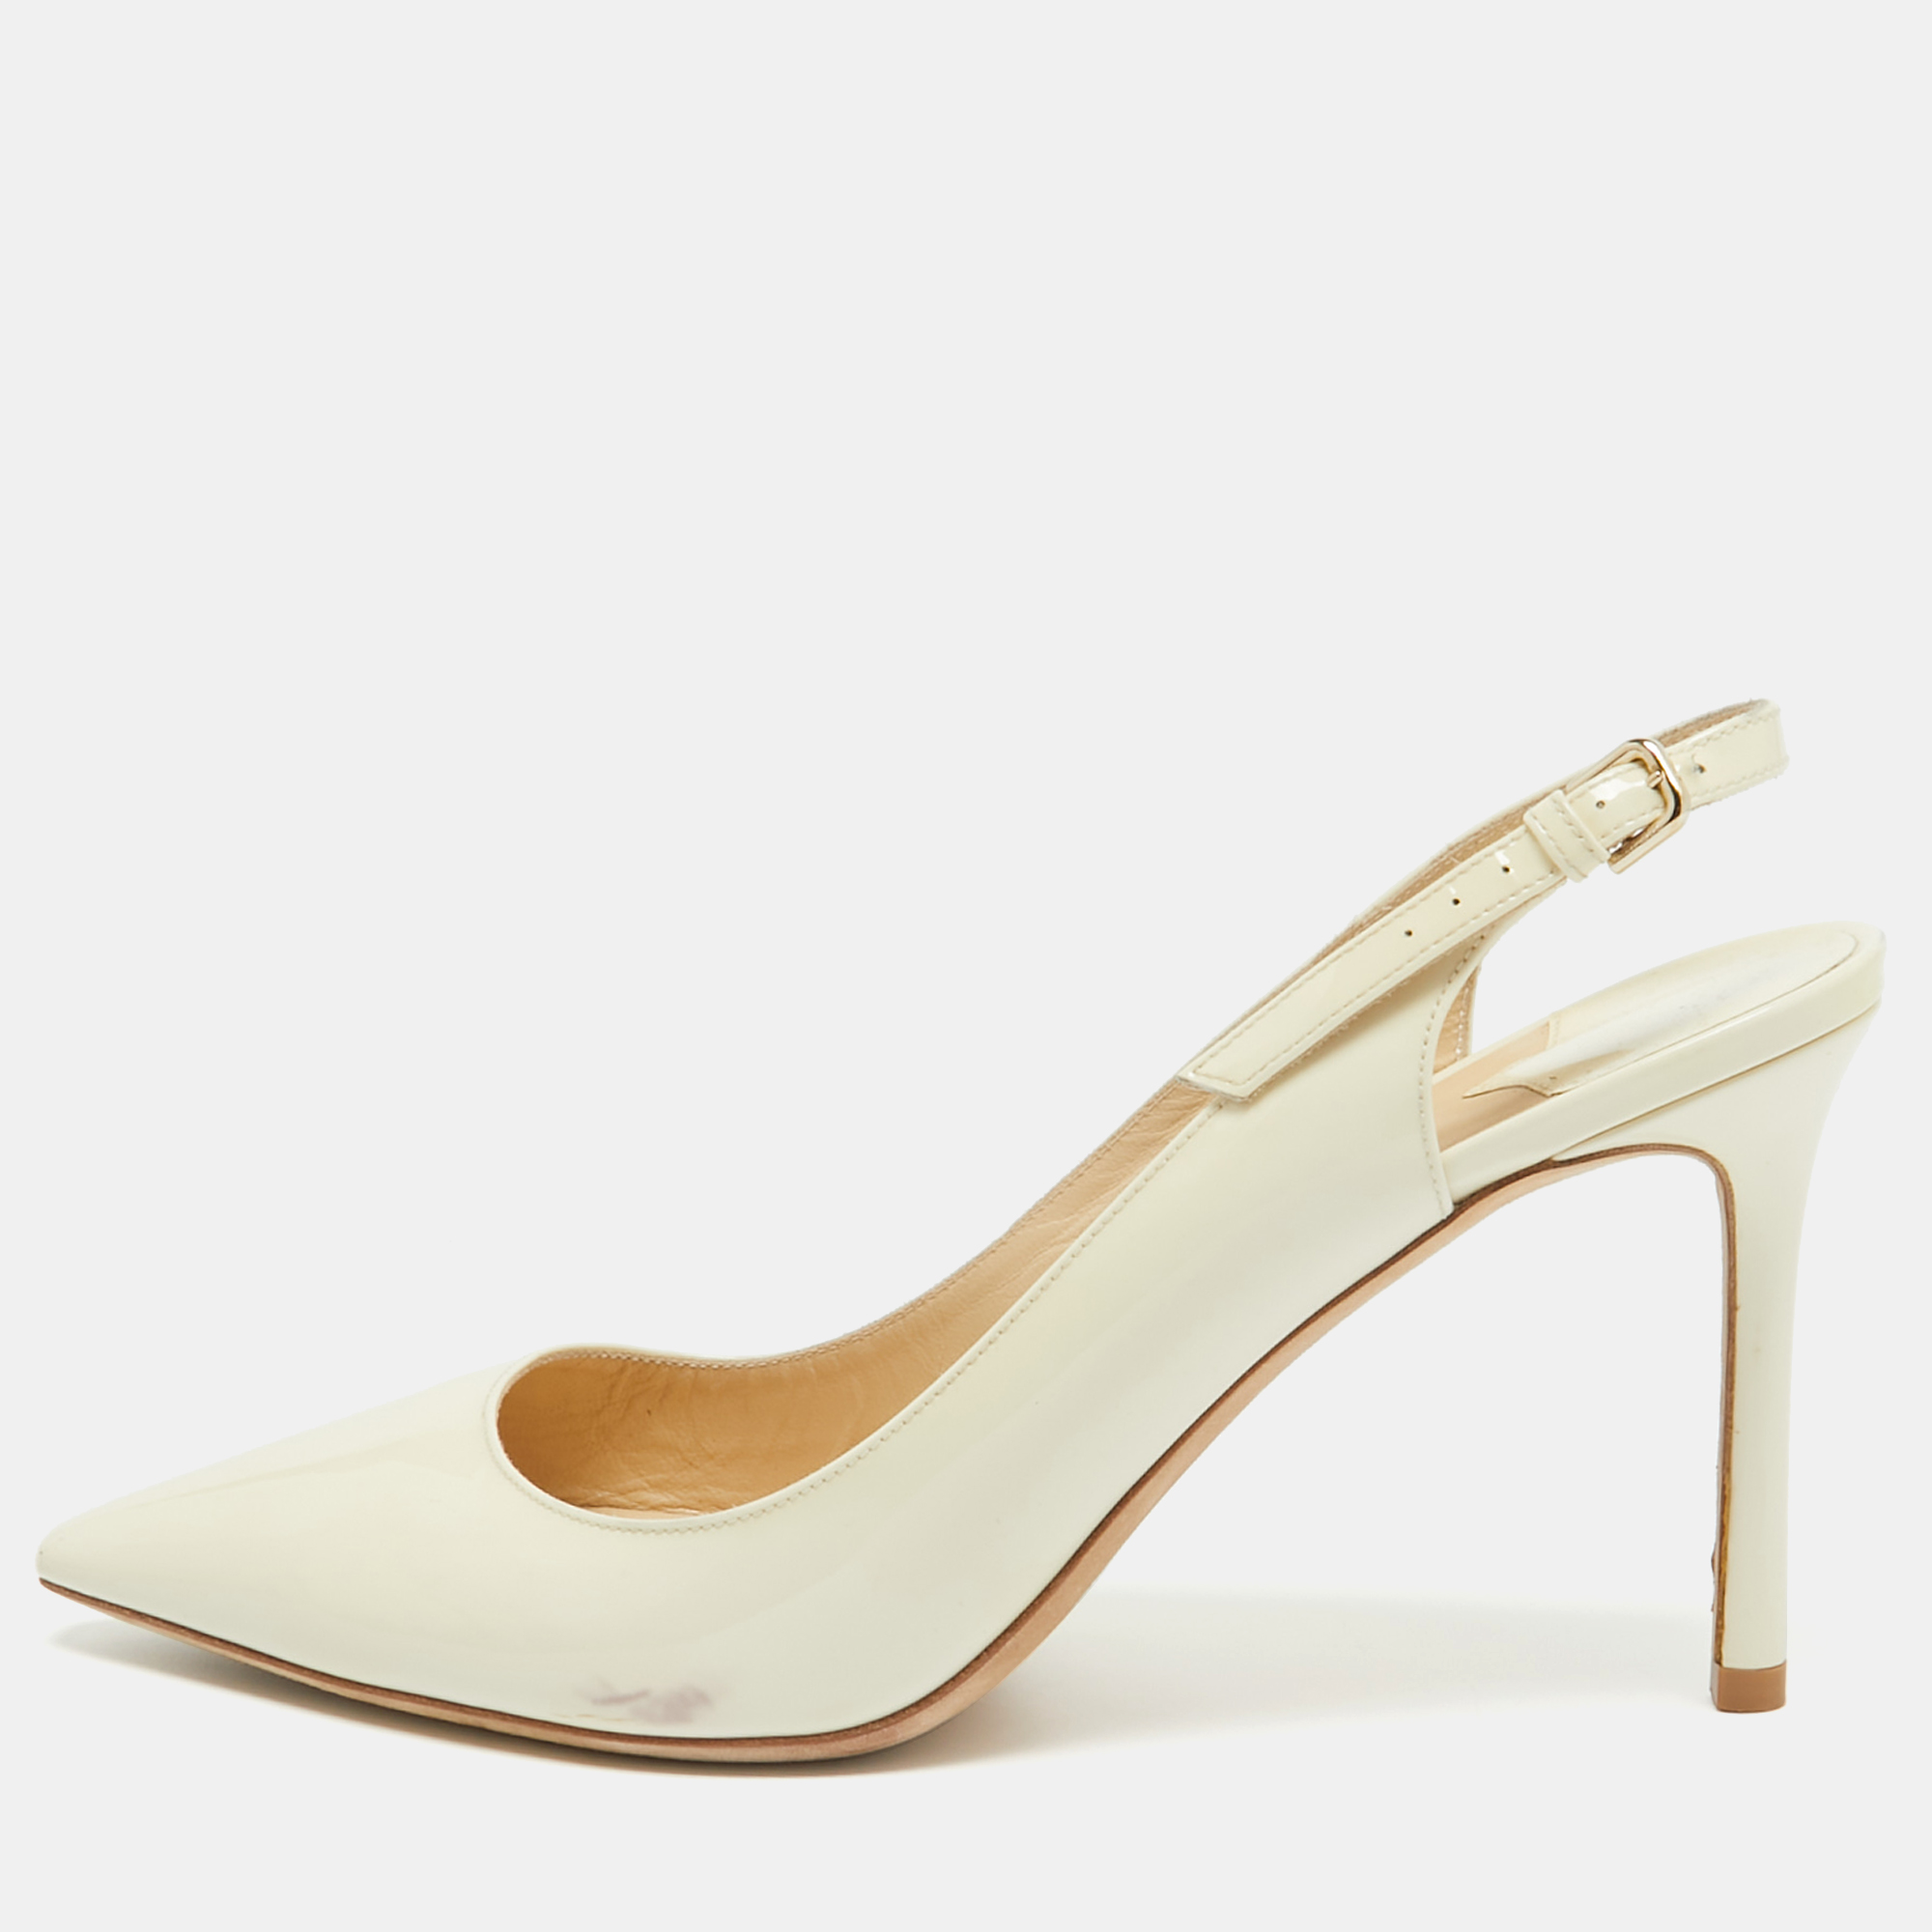 

Jimmy Choo Cream Patent Leather Slingback Pointed Toe Pumps Size